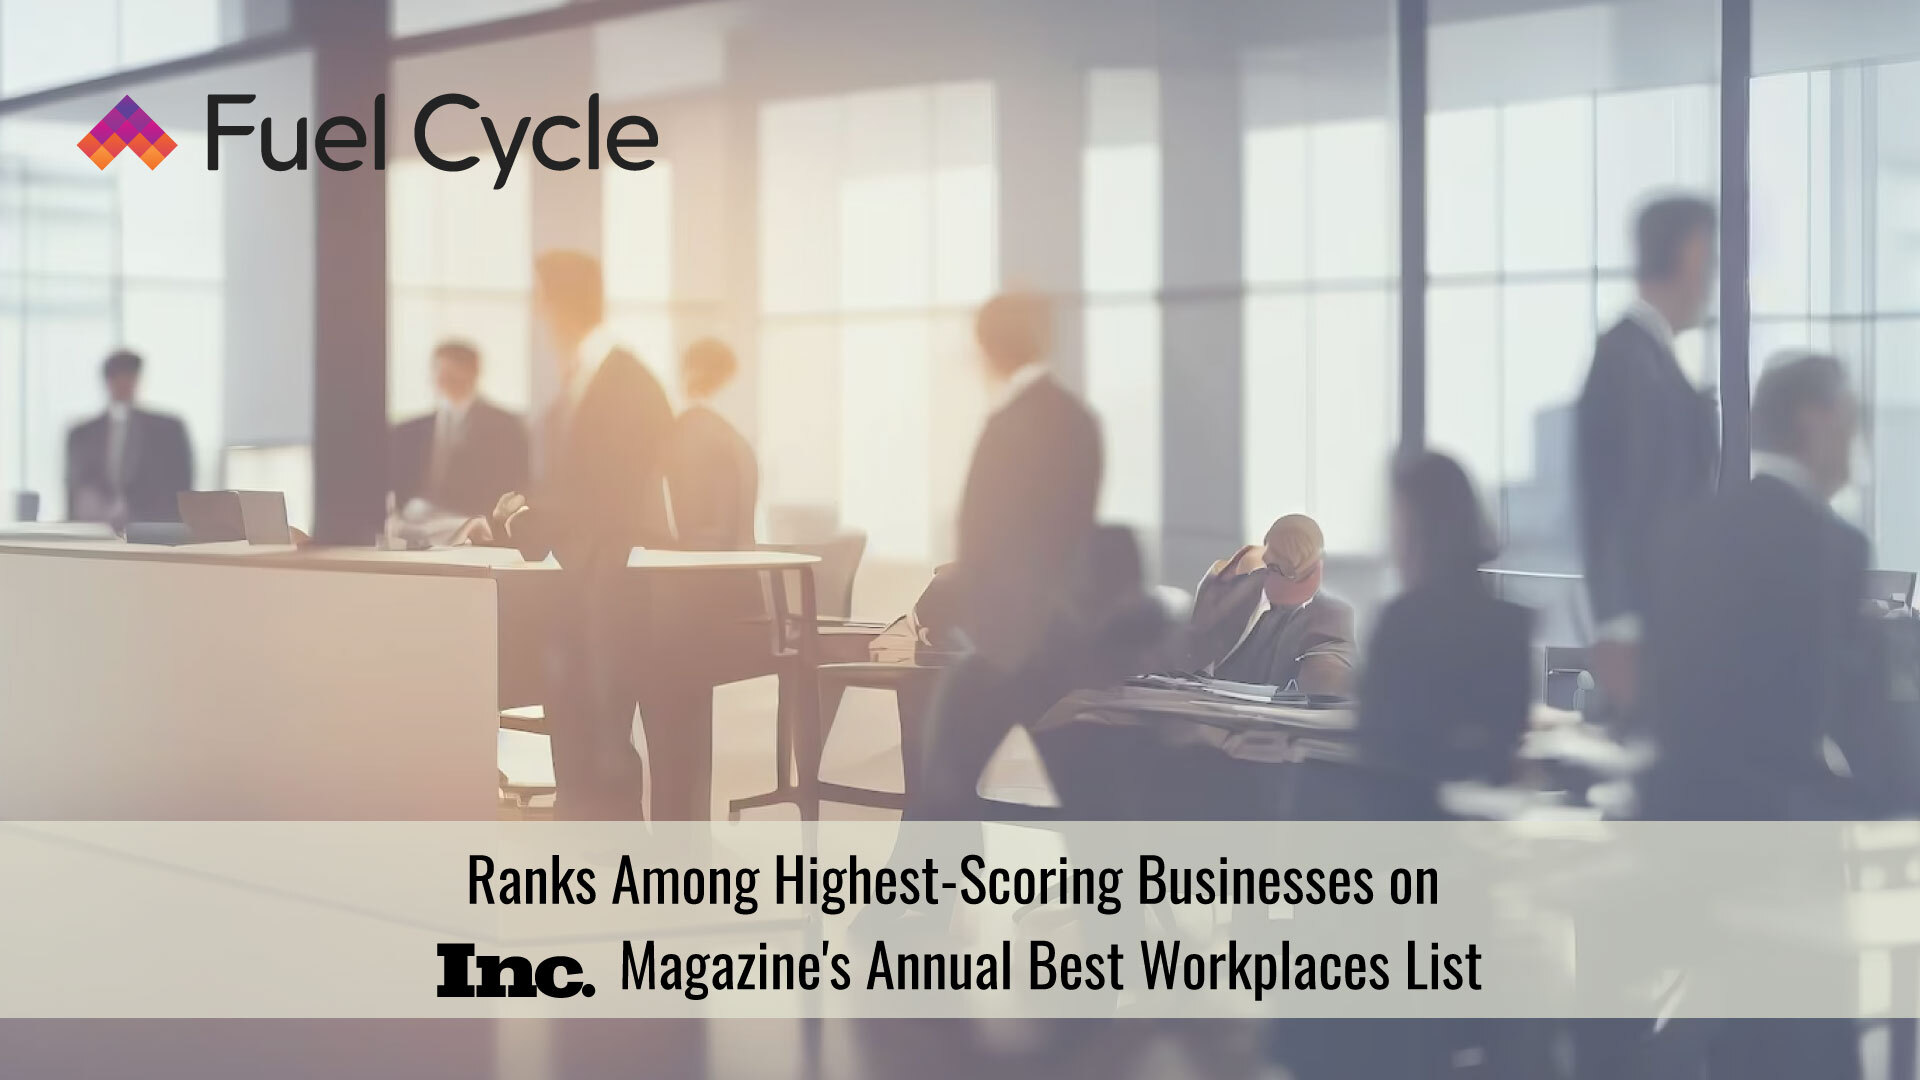 Fuel Cycle Ranks Among Highest-Scoring Businesses on Inc. Magazine's Annual List of Best Workplaces for 2023